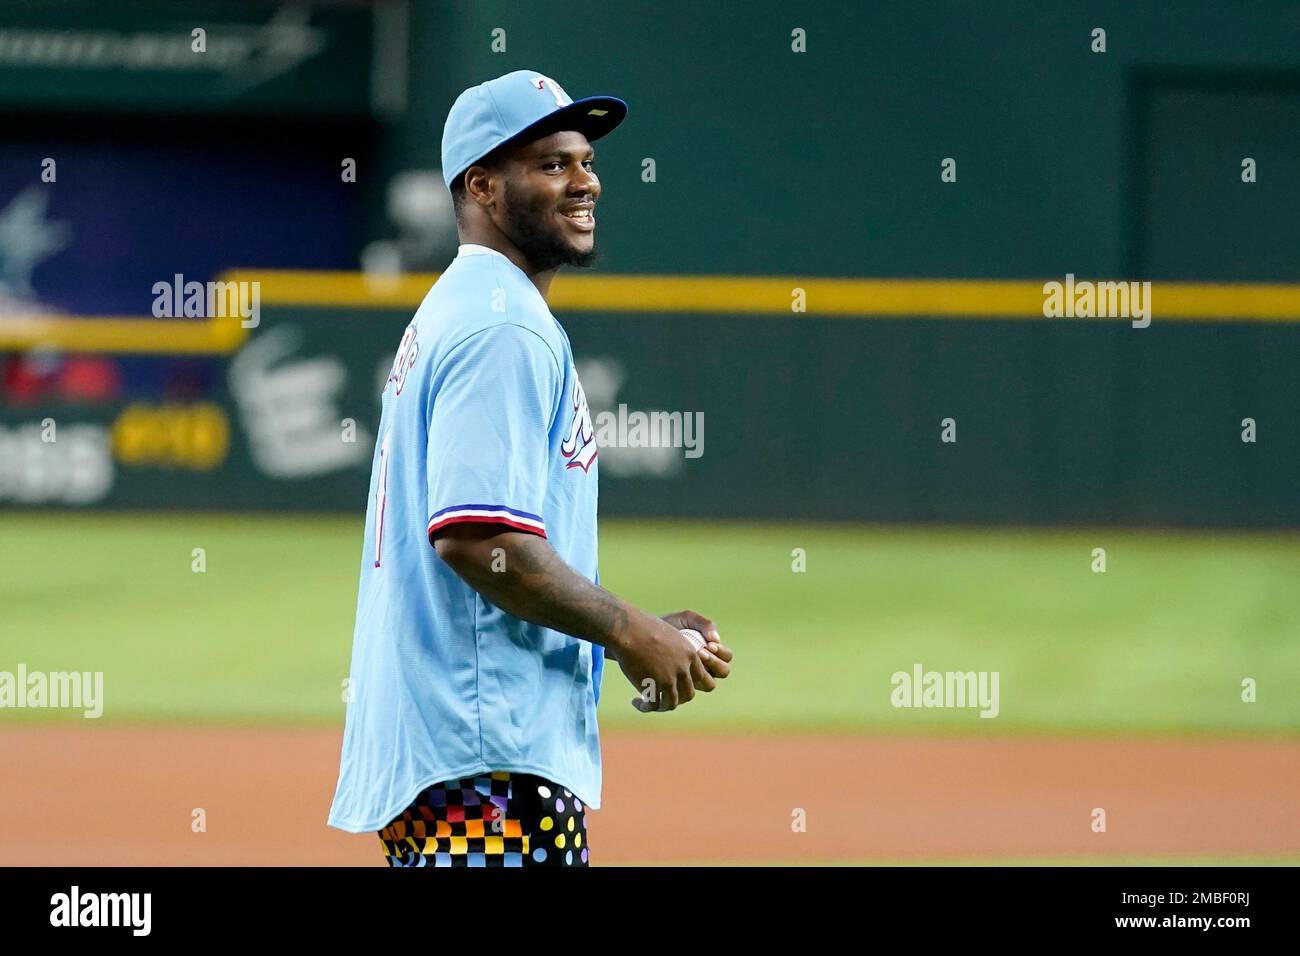 Dallas Cowboys player Micah Parsons walks to the mound to throw out the  ceremonial first pitch before a baseball game between the Los Angeles  Angels and the Texas Rangers, Tuesday, May 17,